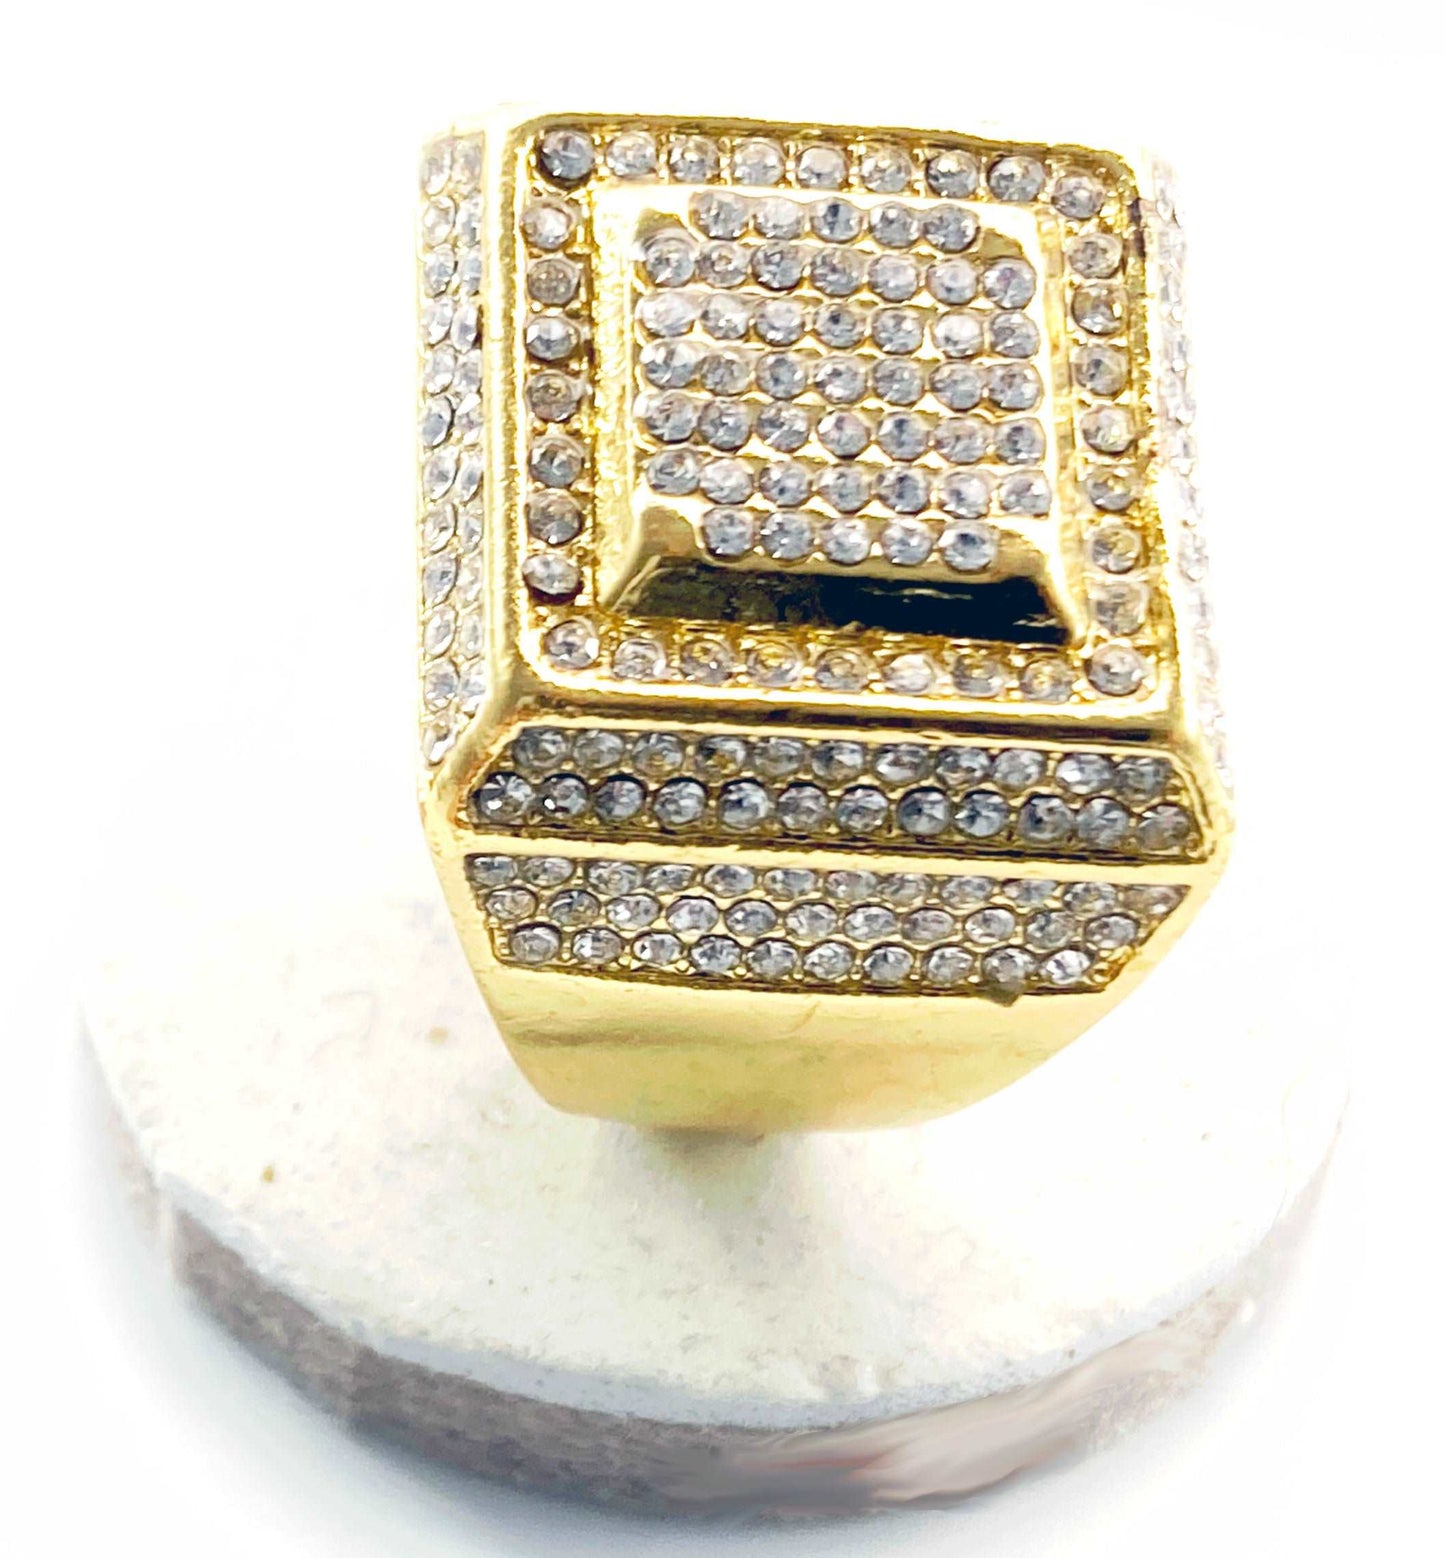 14K Gold Finish Pyramid mens CZ diamond ring over 3 carats of stones. - Providence silver gold jewelry usa